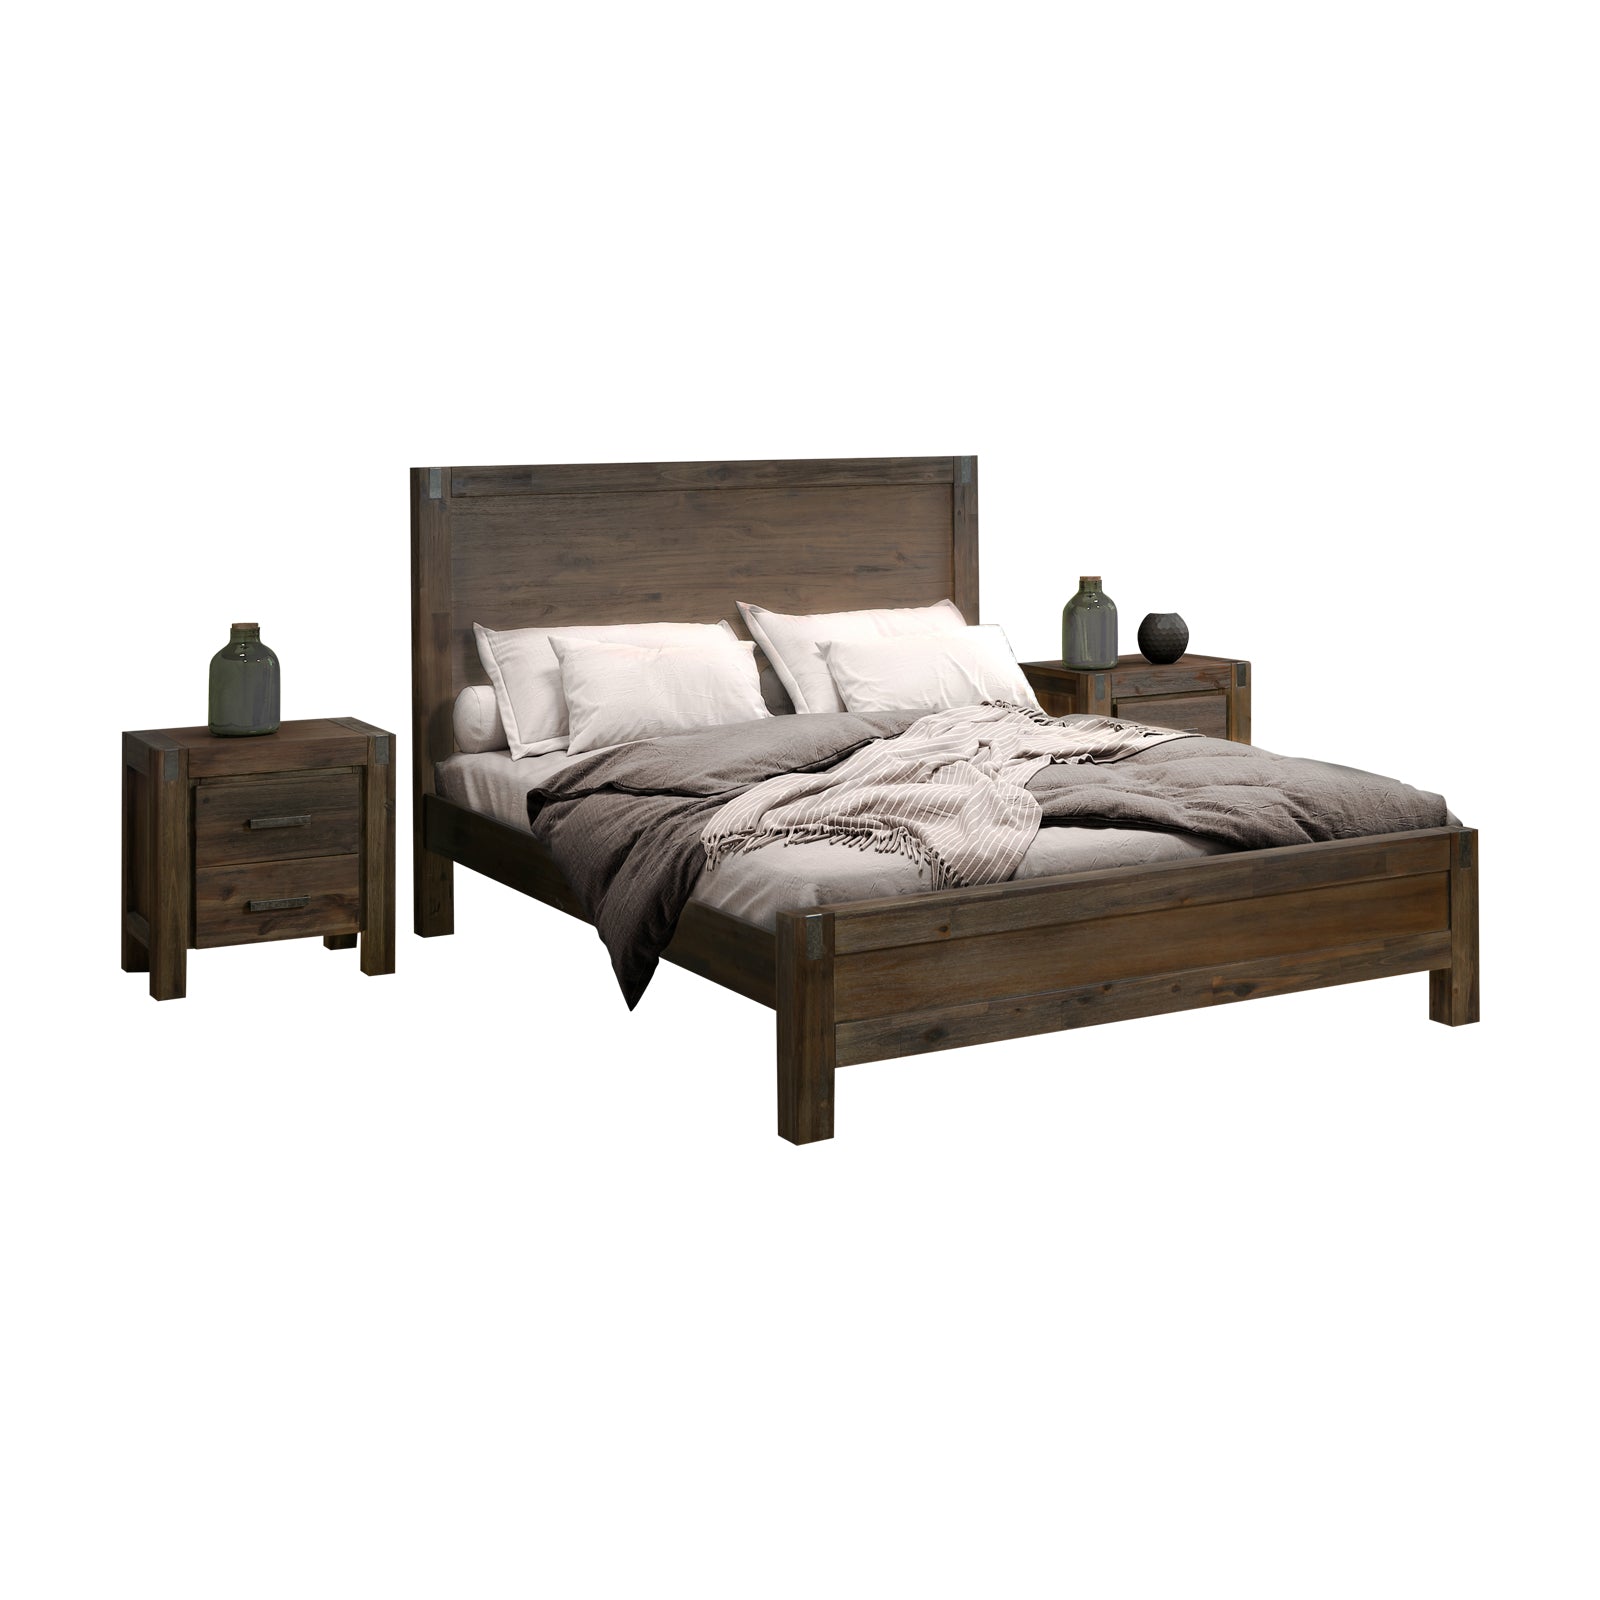 4 Pieces Bedroom Suite in Solid Wood Veneered Acacia Construction Timber Slat King Size Chocolate Colour Bed, Bedside Table & Dresser - ozily